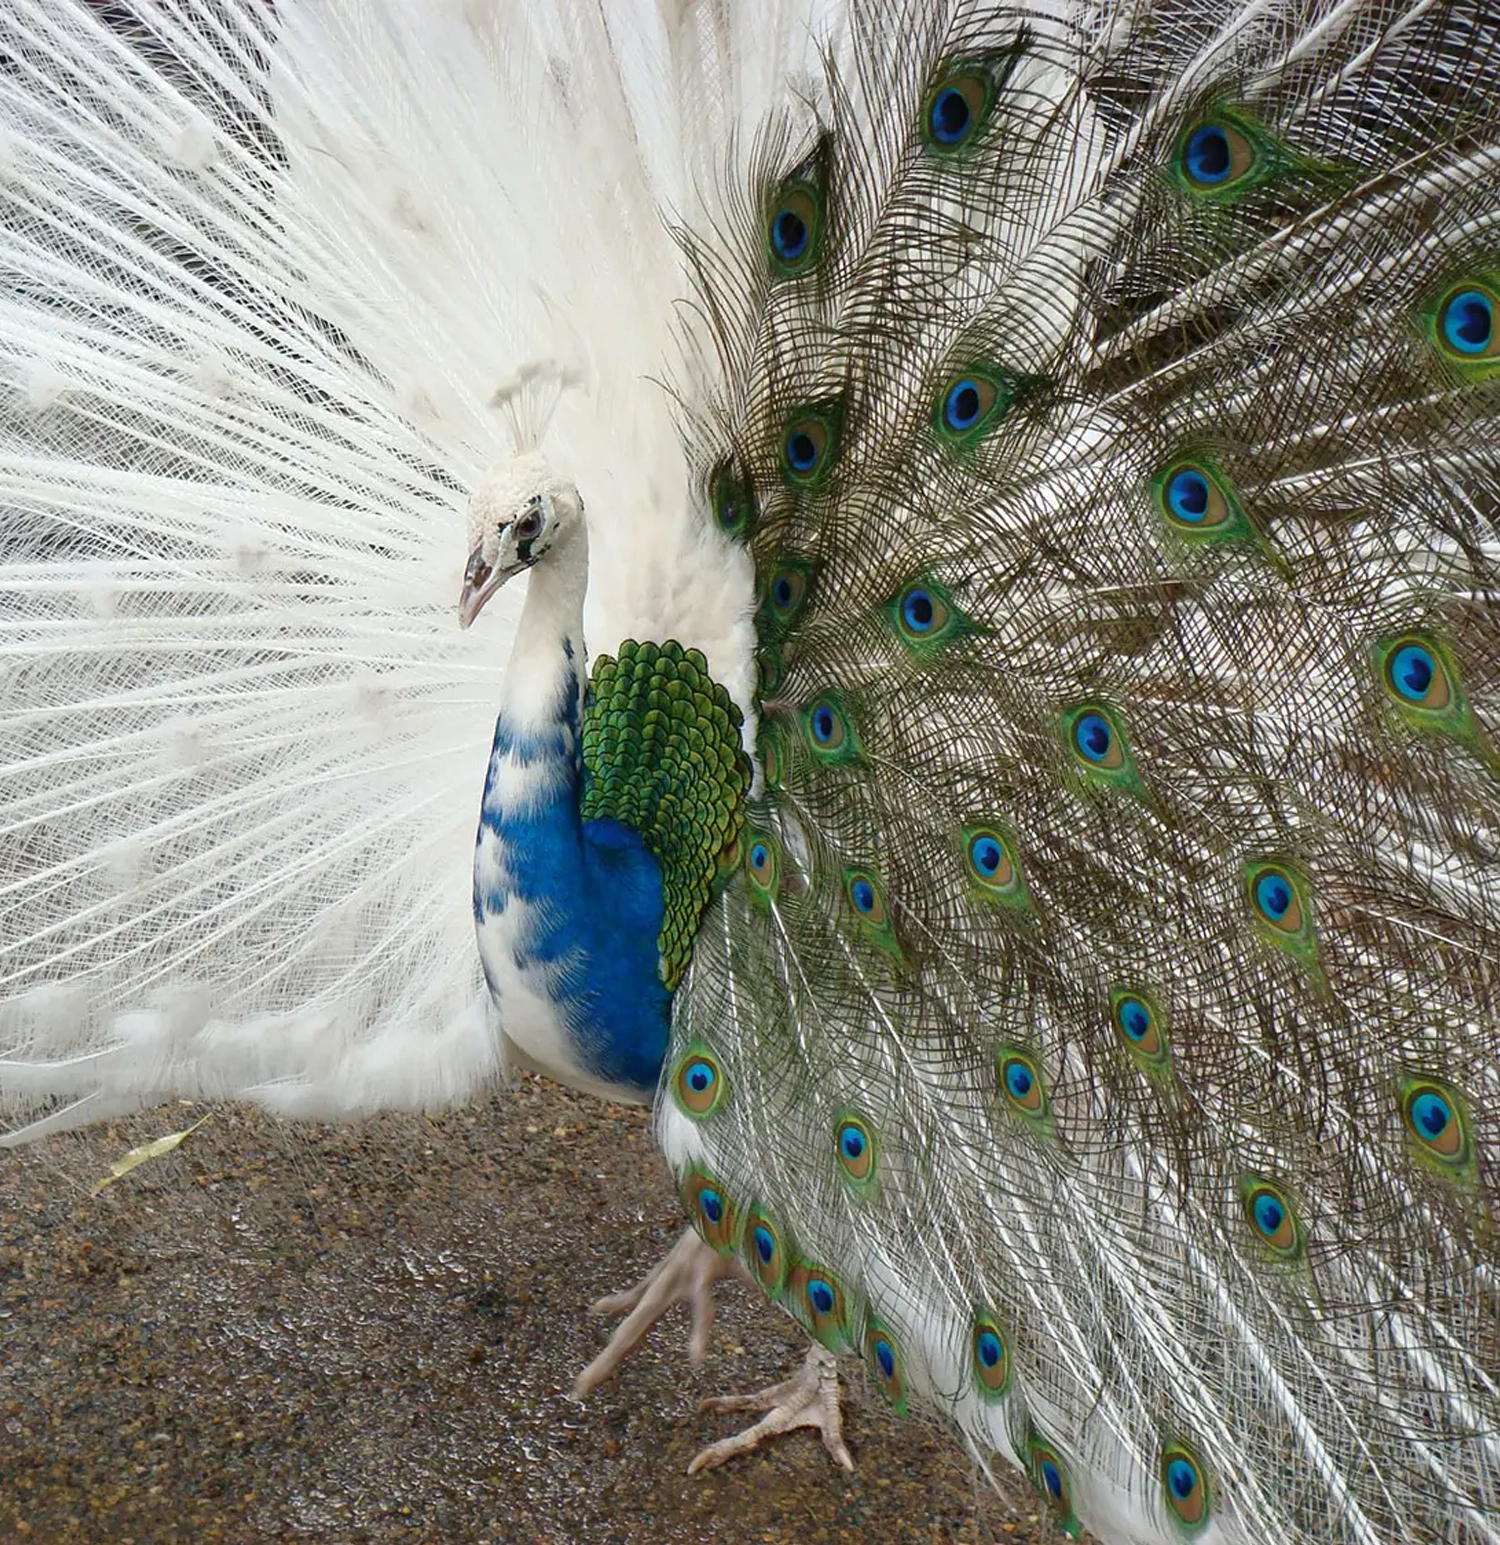 A chimeric peacock. The right half of its feathers are entirely white while the left half are the traditional brown, green, and blue hues.